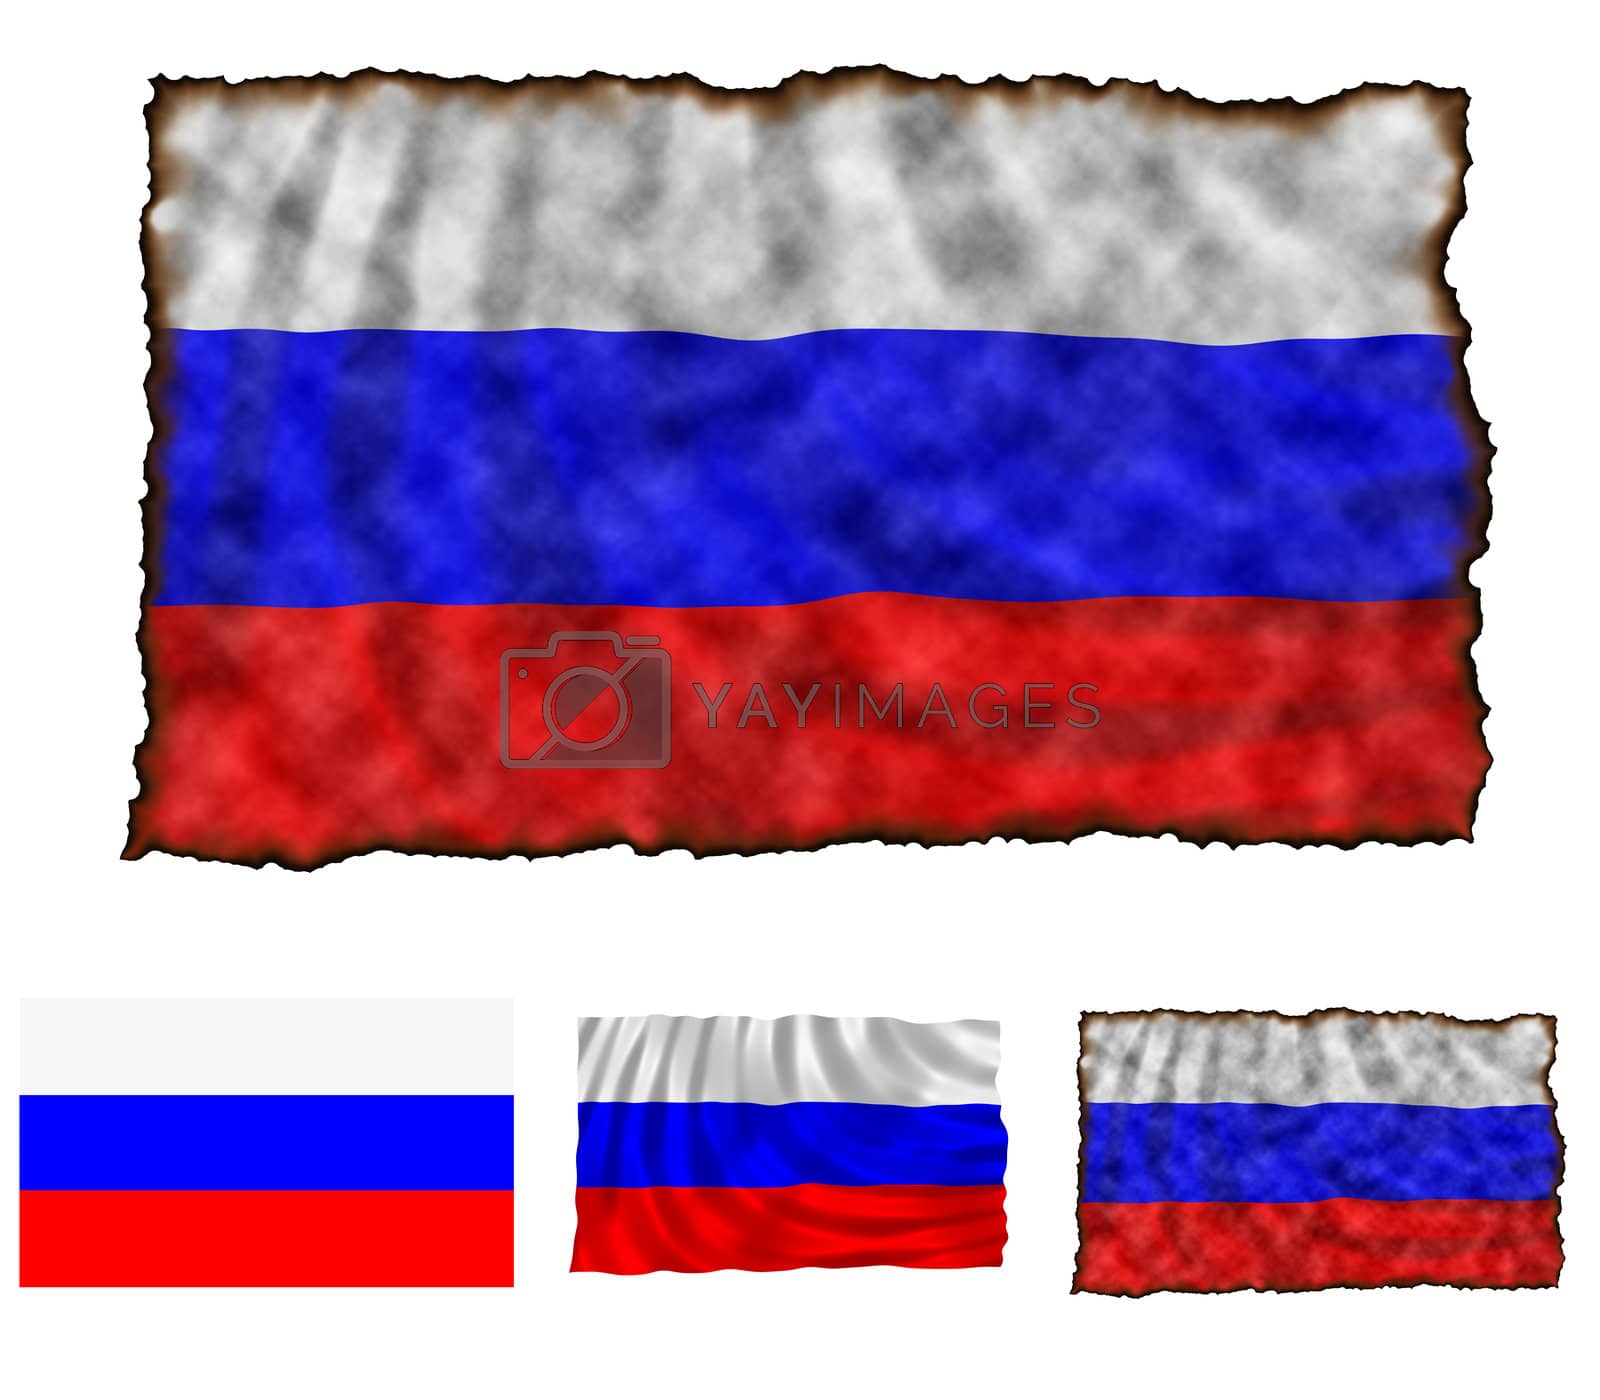 Royalty free image of Flag of Russia by SNR